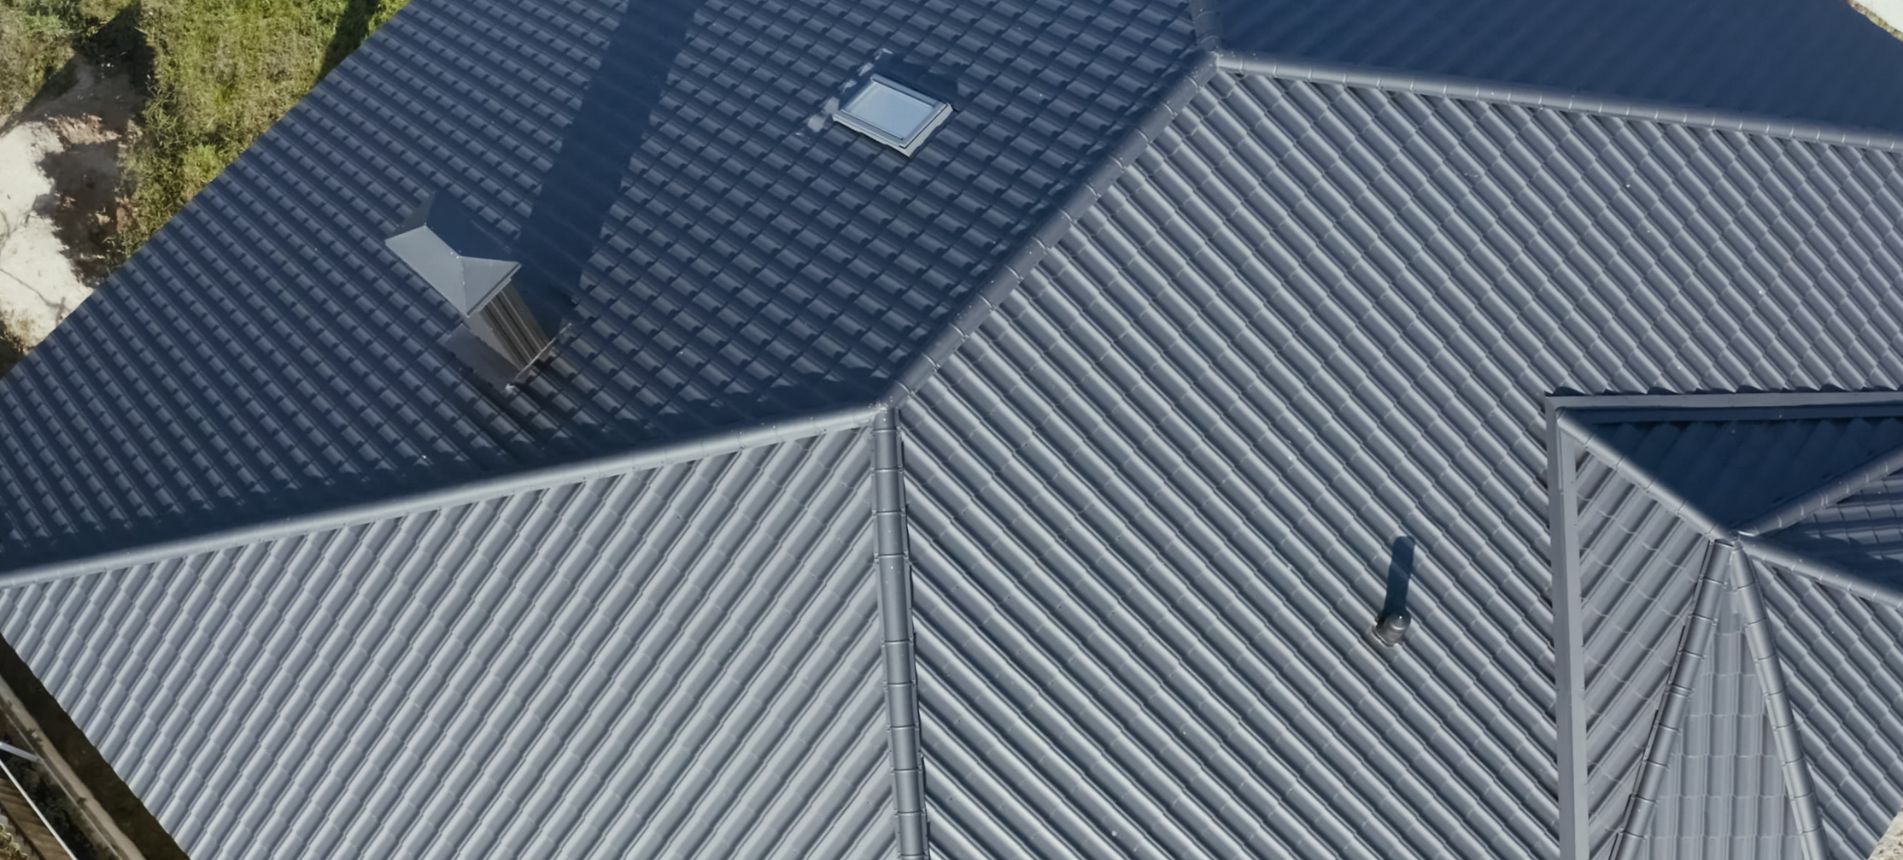 5 Common Misconceptions About Metal Roofing